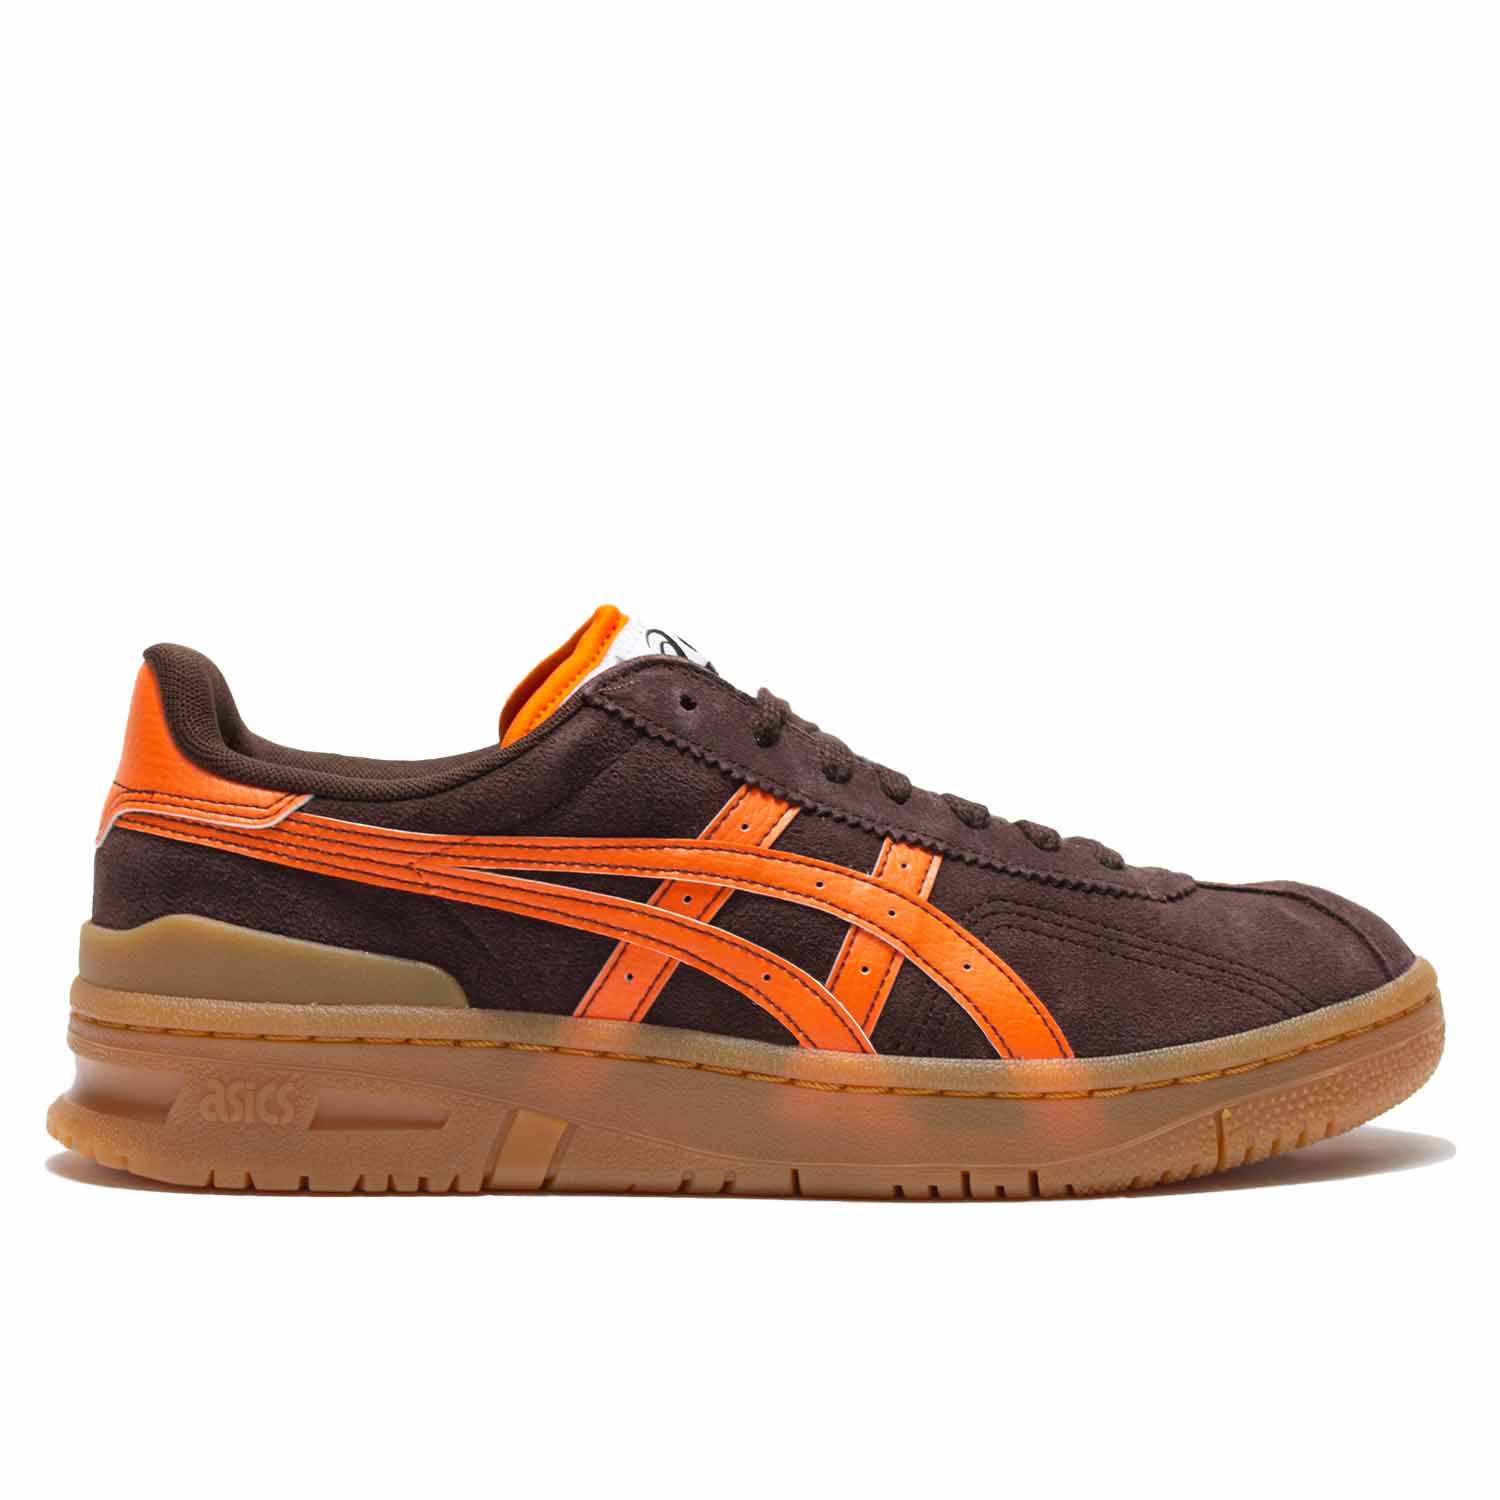 Asics Vic NBD in coffee colored brown suede. Orange leather accents on heel, and side. Orange leather Asics logo. Orange piping on white puffy tongue. Light brown slightly translucent sole.